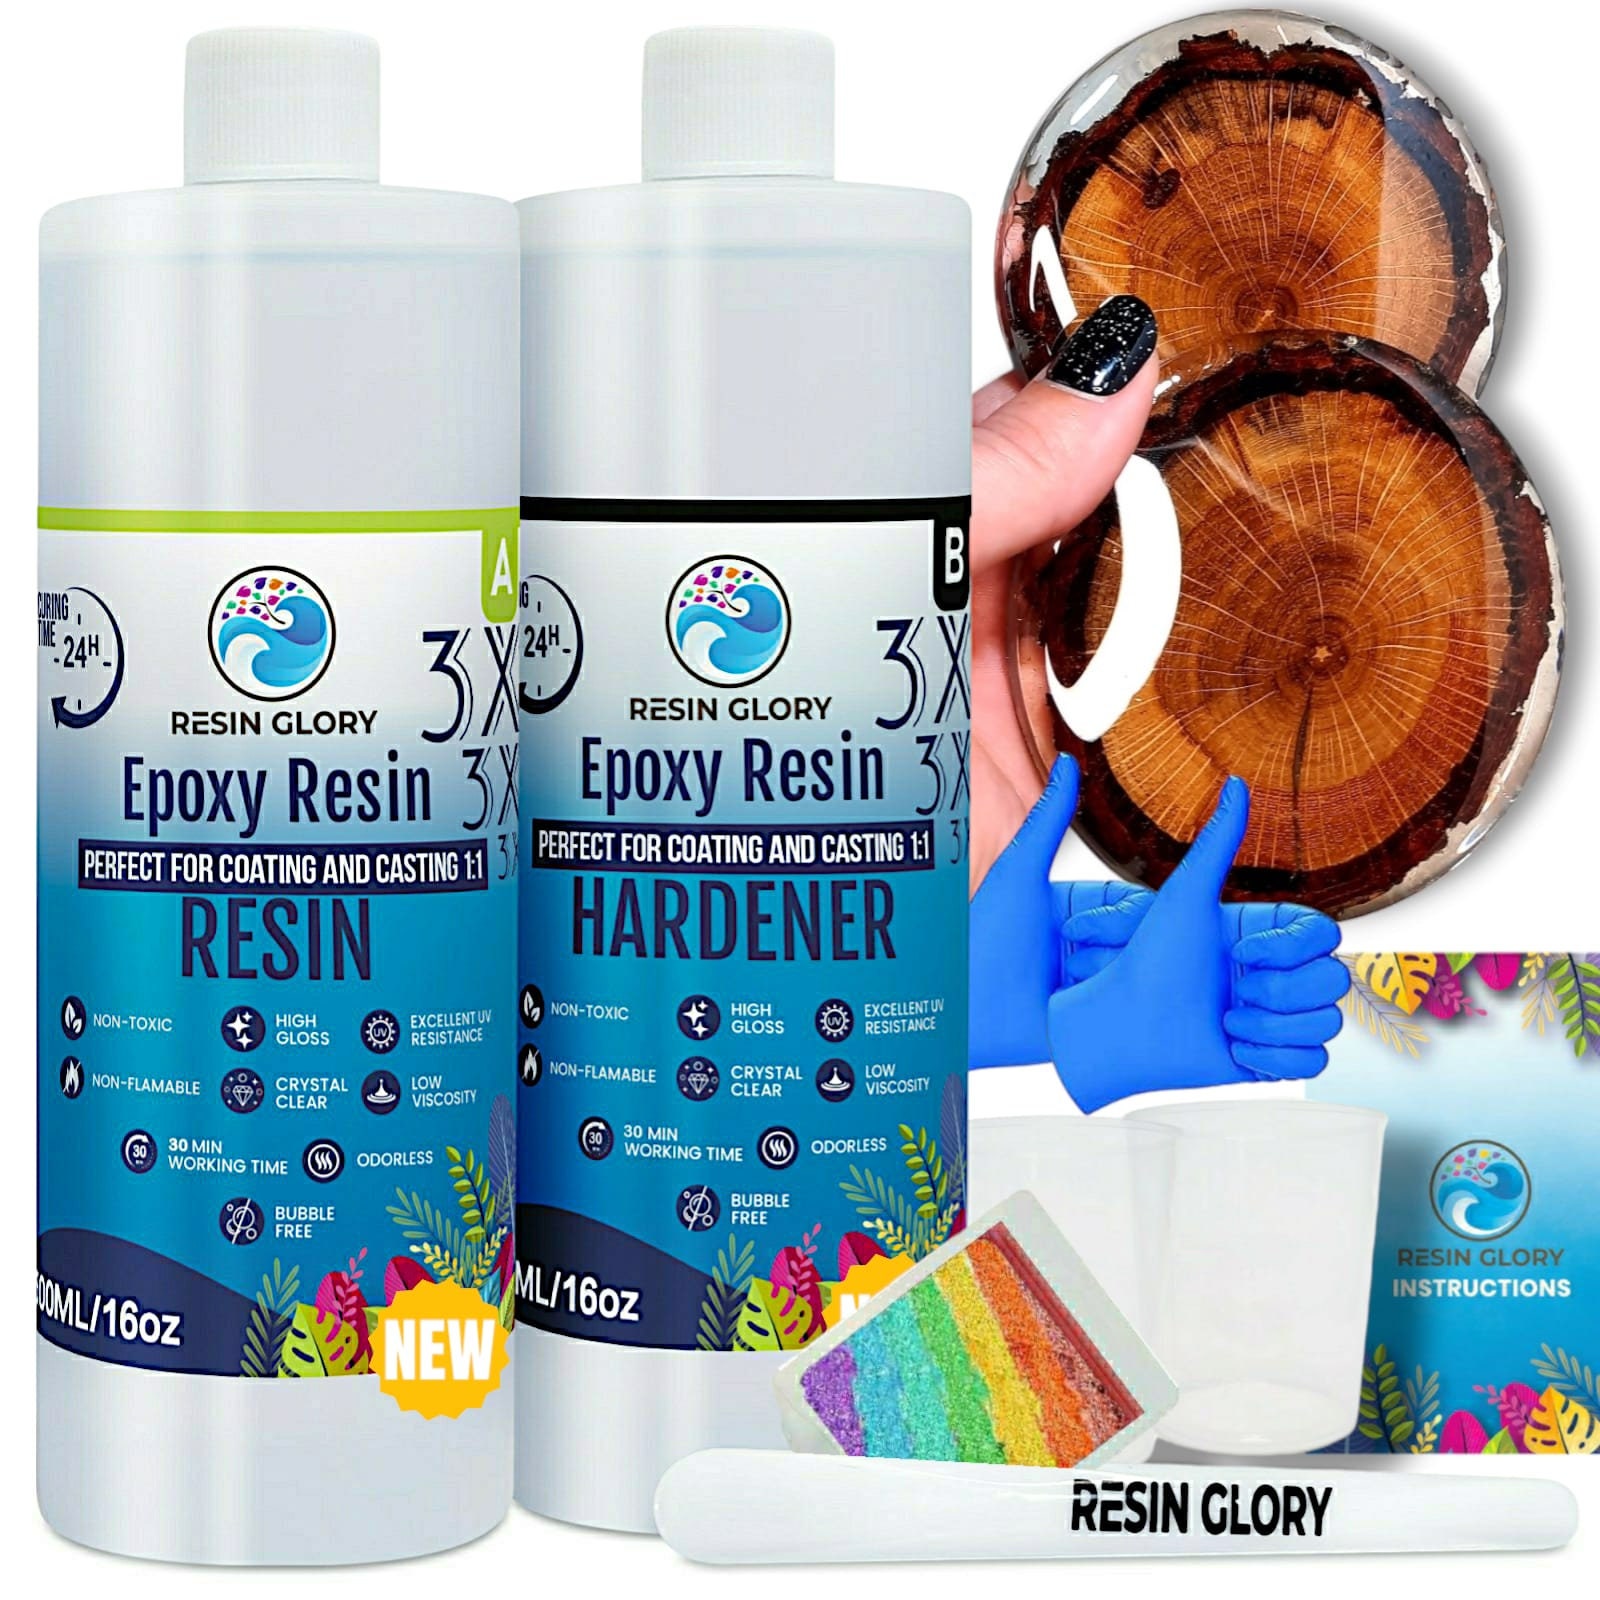 Eco Resin Kit Eco Pour Resin Art Casting Powder 3kg and Eco Resin